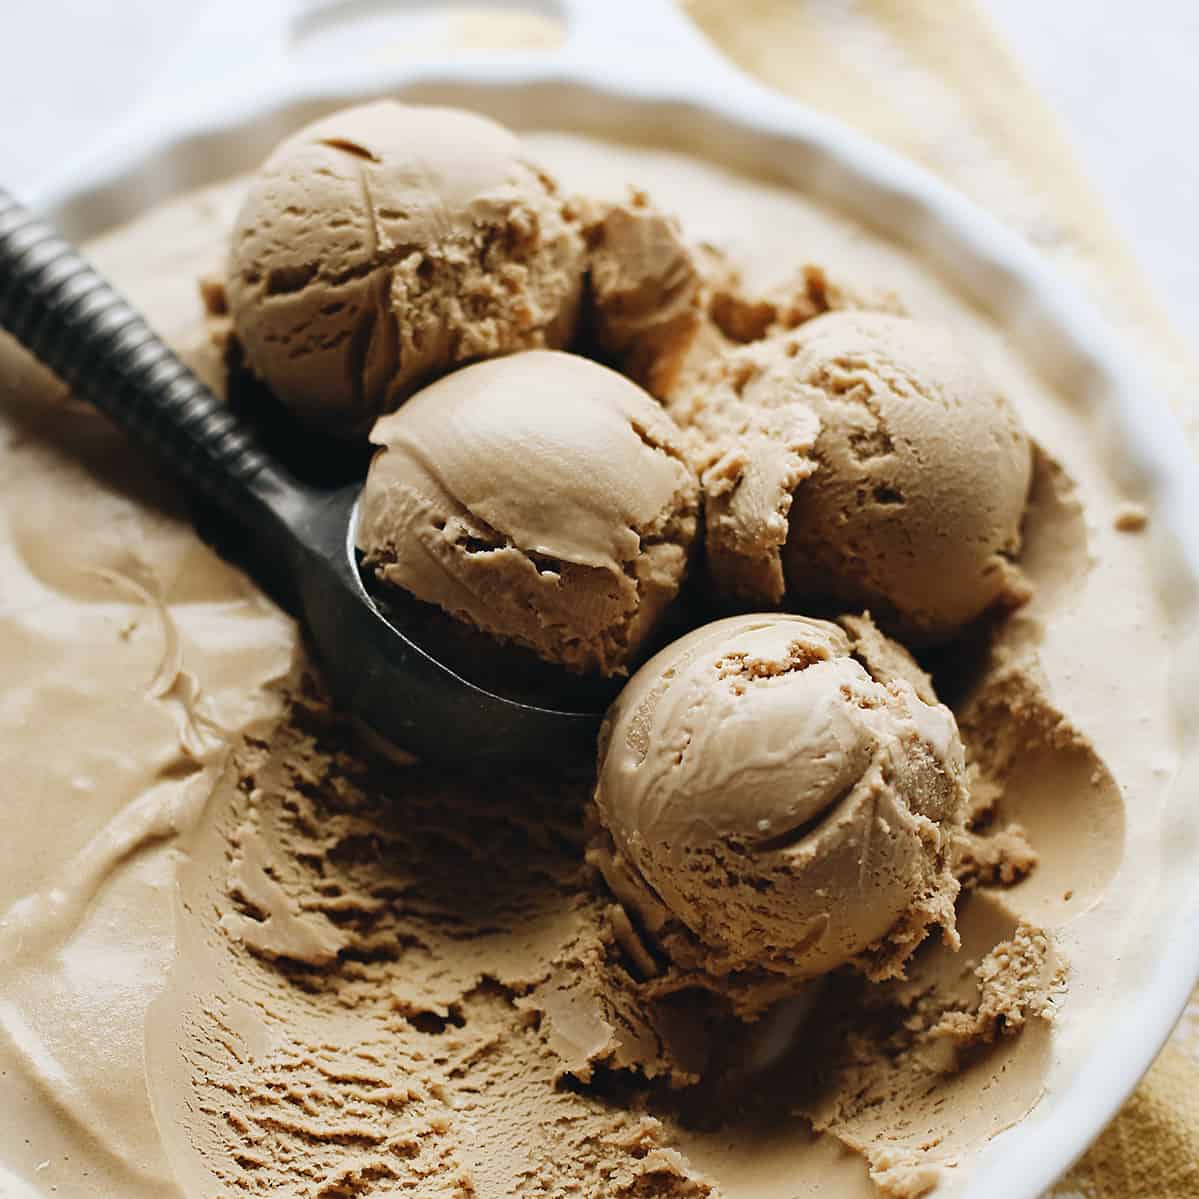 4 scoops of Coffee Ice Cream in a dish with an ice cream scoop